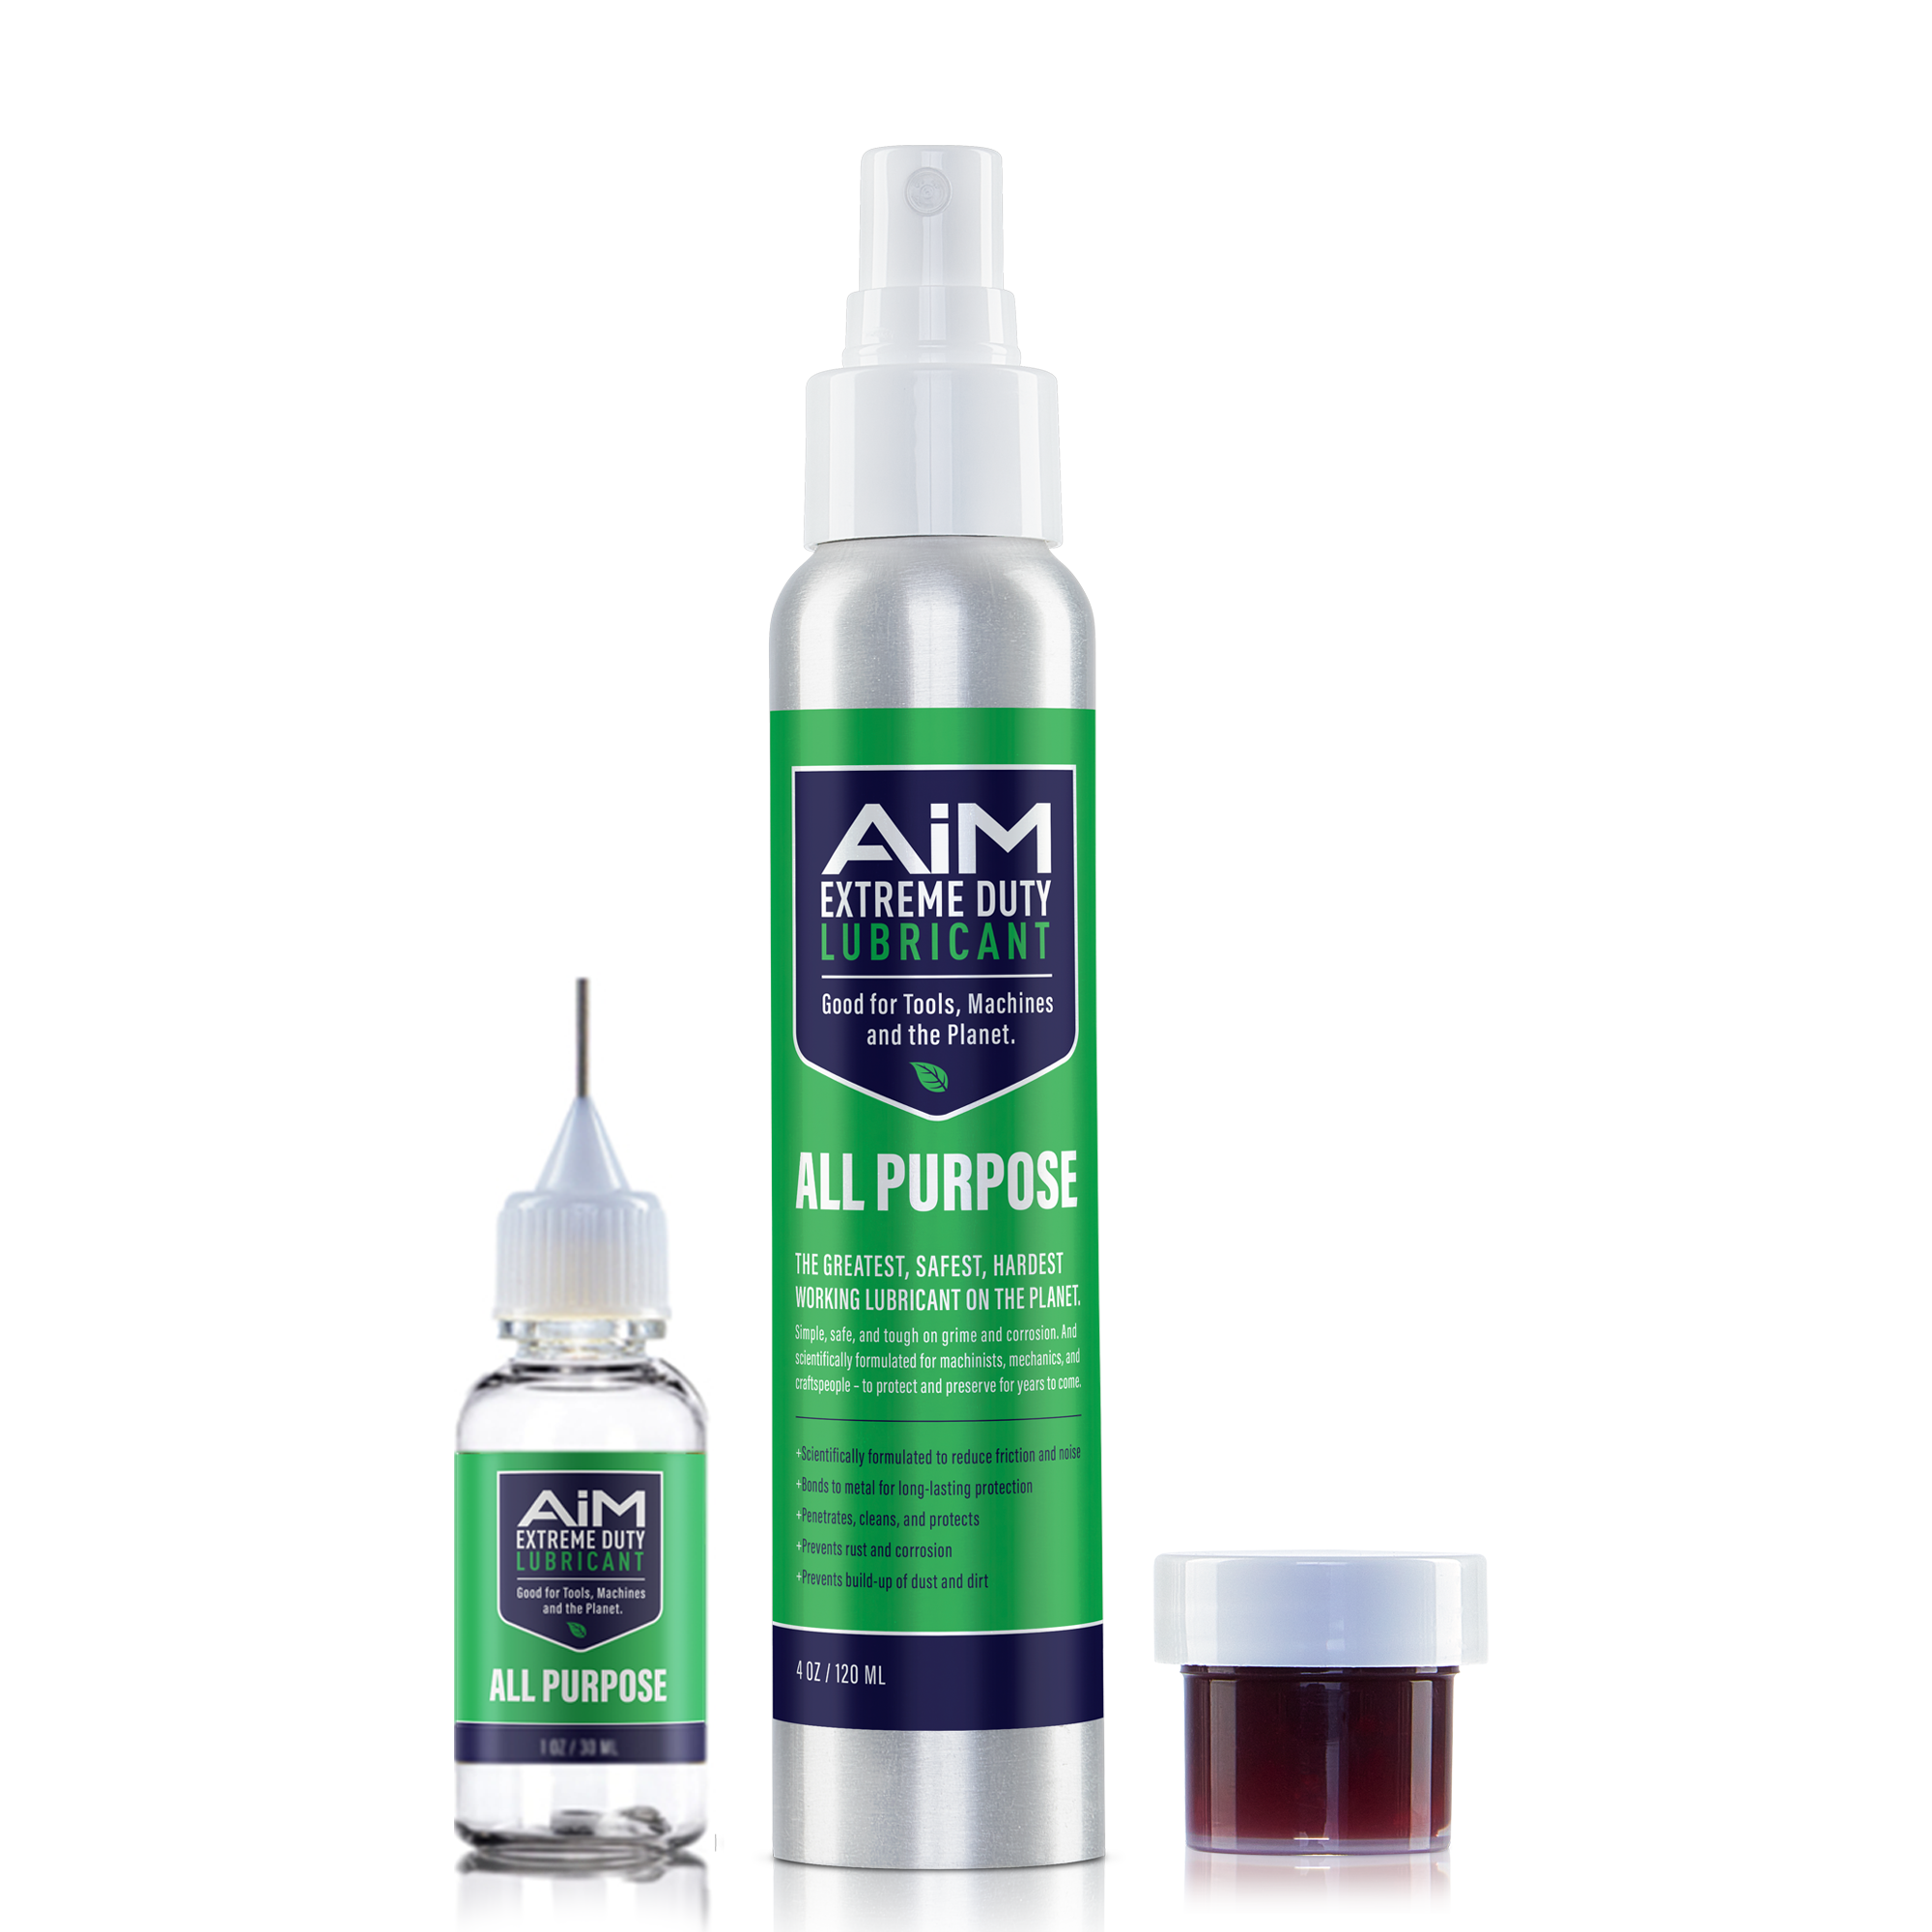 AiM Extreme Duty Lubricant | Exercise Equipment Lube | Small Kit | 4oz sprayer + 0.25 oz grease + precision bottle